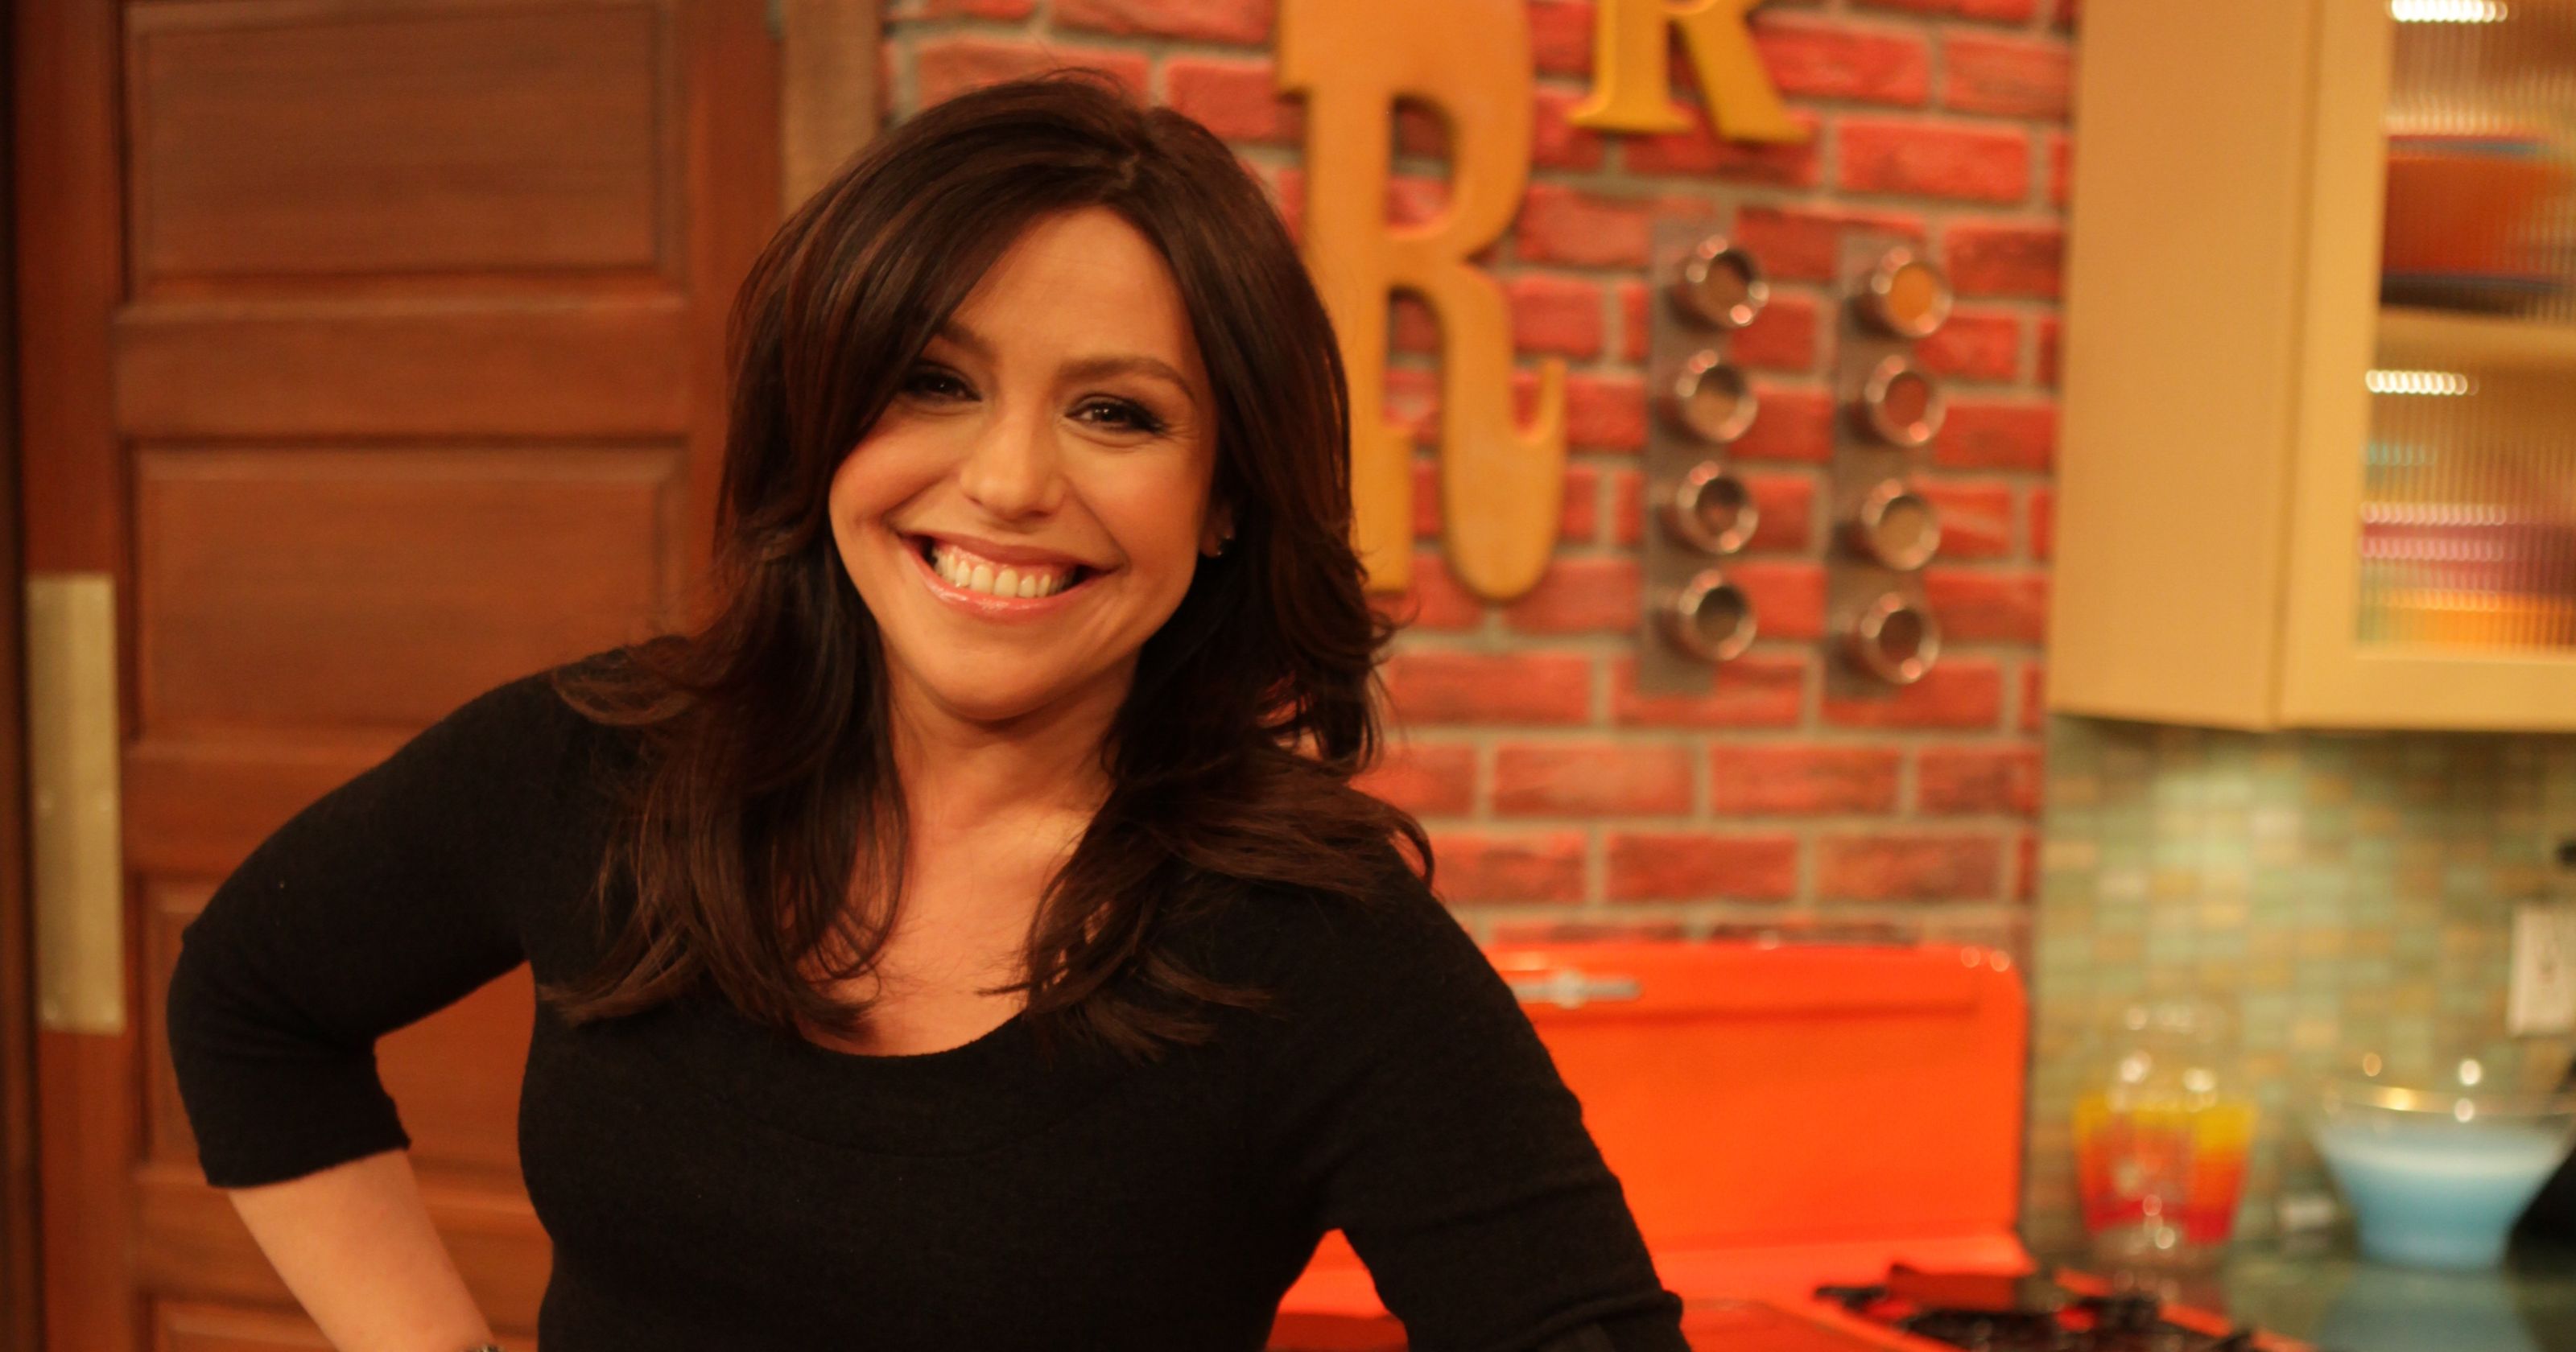 6. Rachel Ray - Worst Tipper - You think some who is all about food and supposedly about the service industry would be a good tipper, but not this fraud. On her show, she tipped $1 on a $10 cheque, which is promoting to millions of people that you should tip below 20%.
